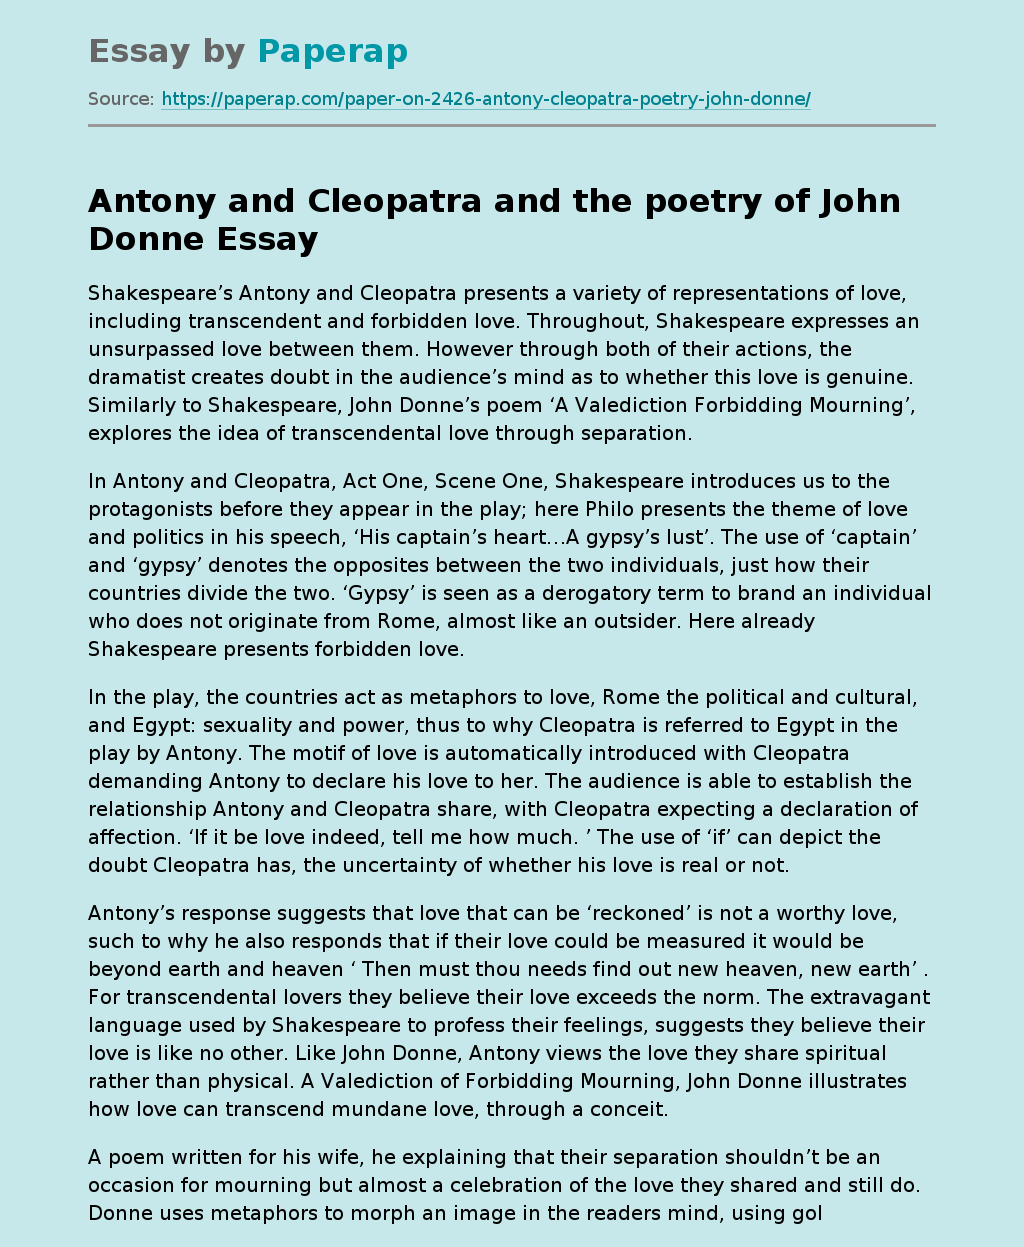 Antony and Cleopatra and the poetry of John Donne